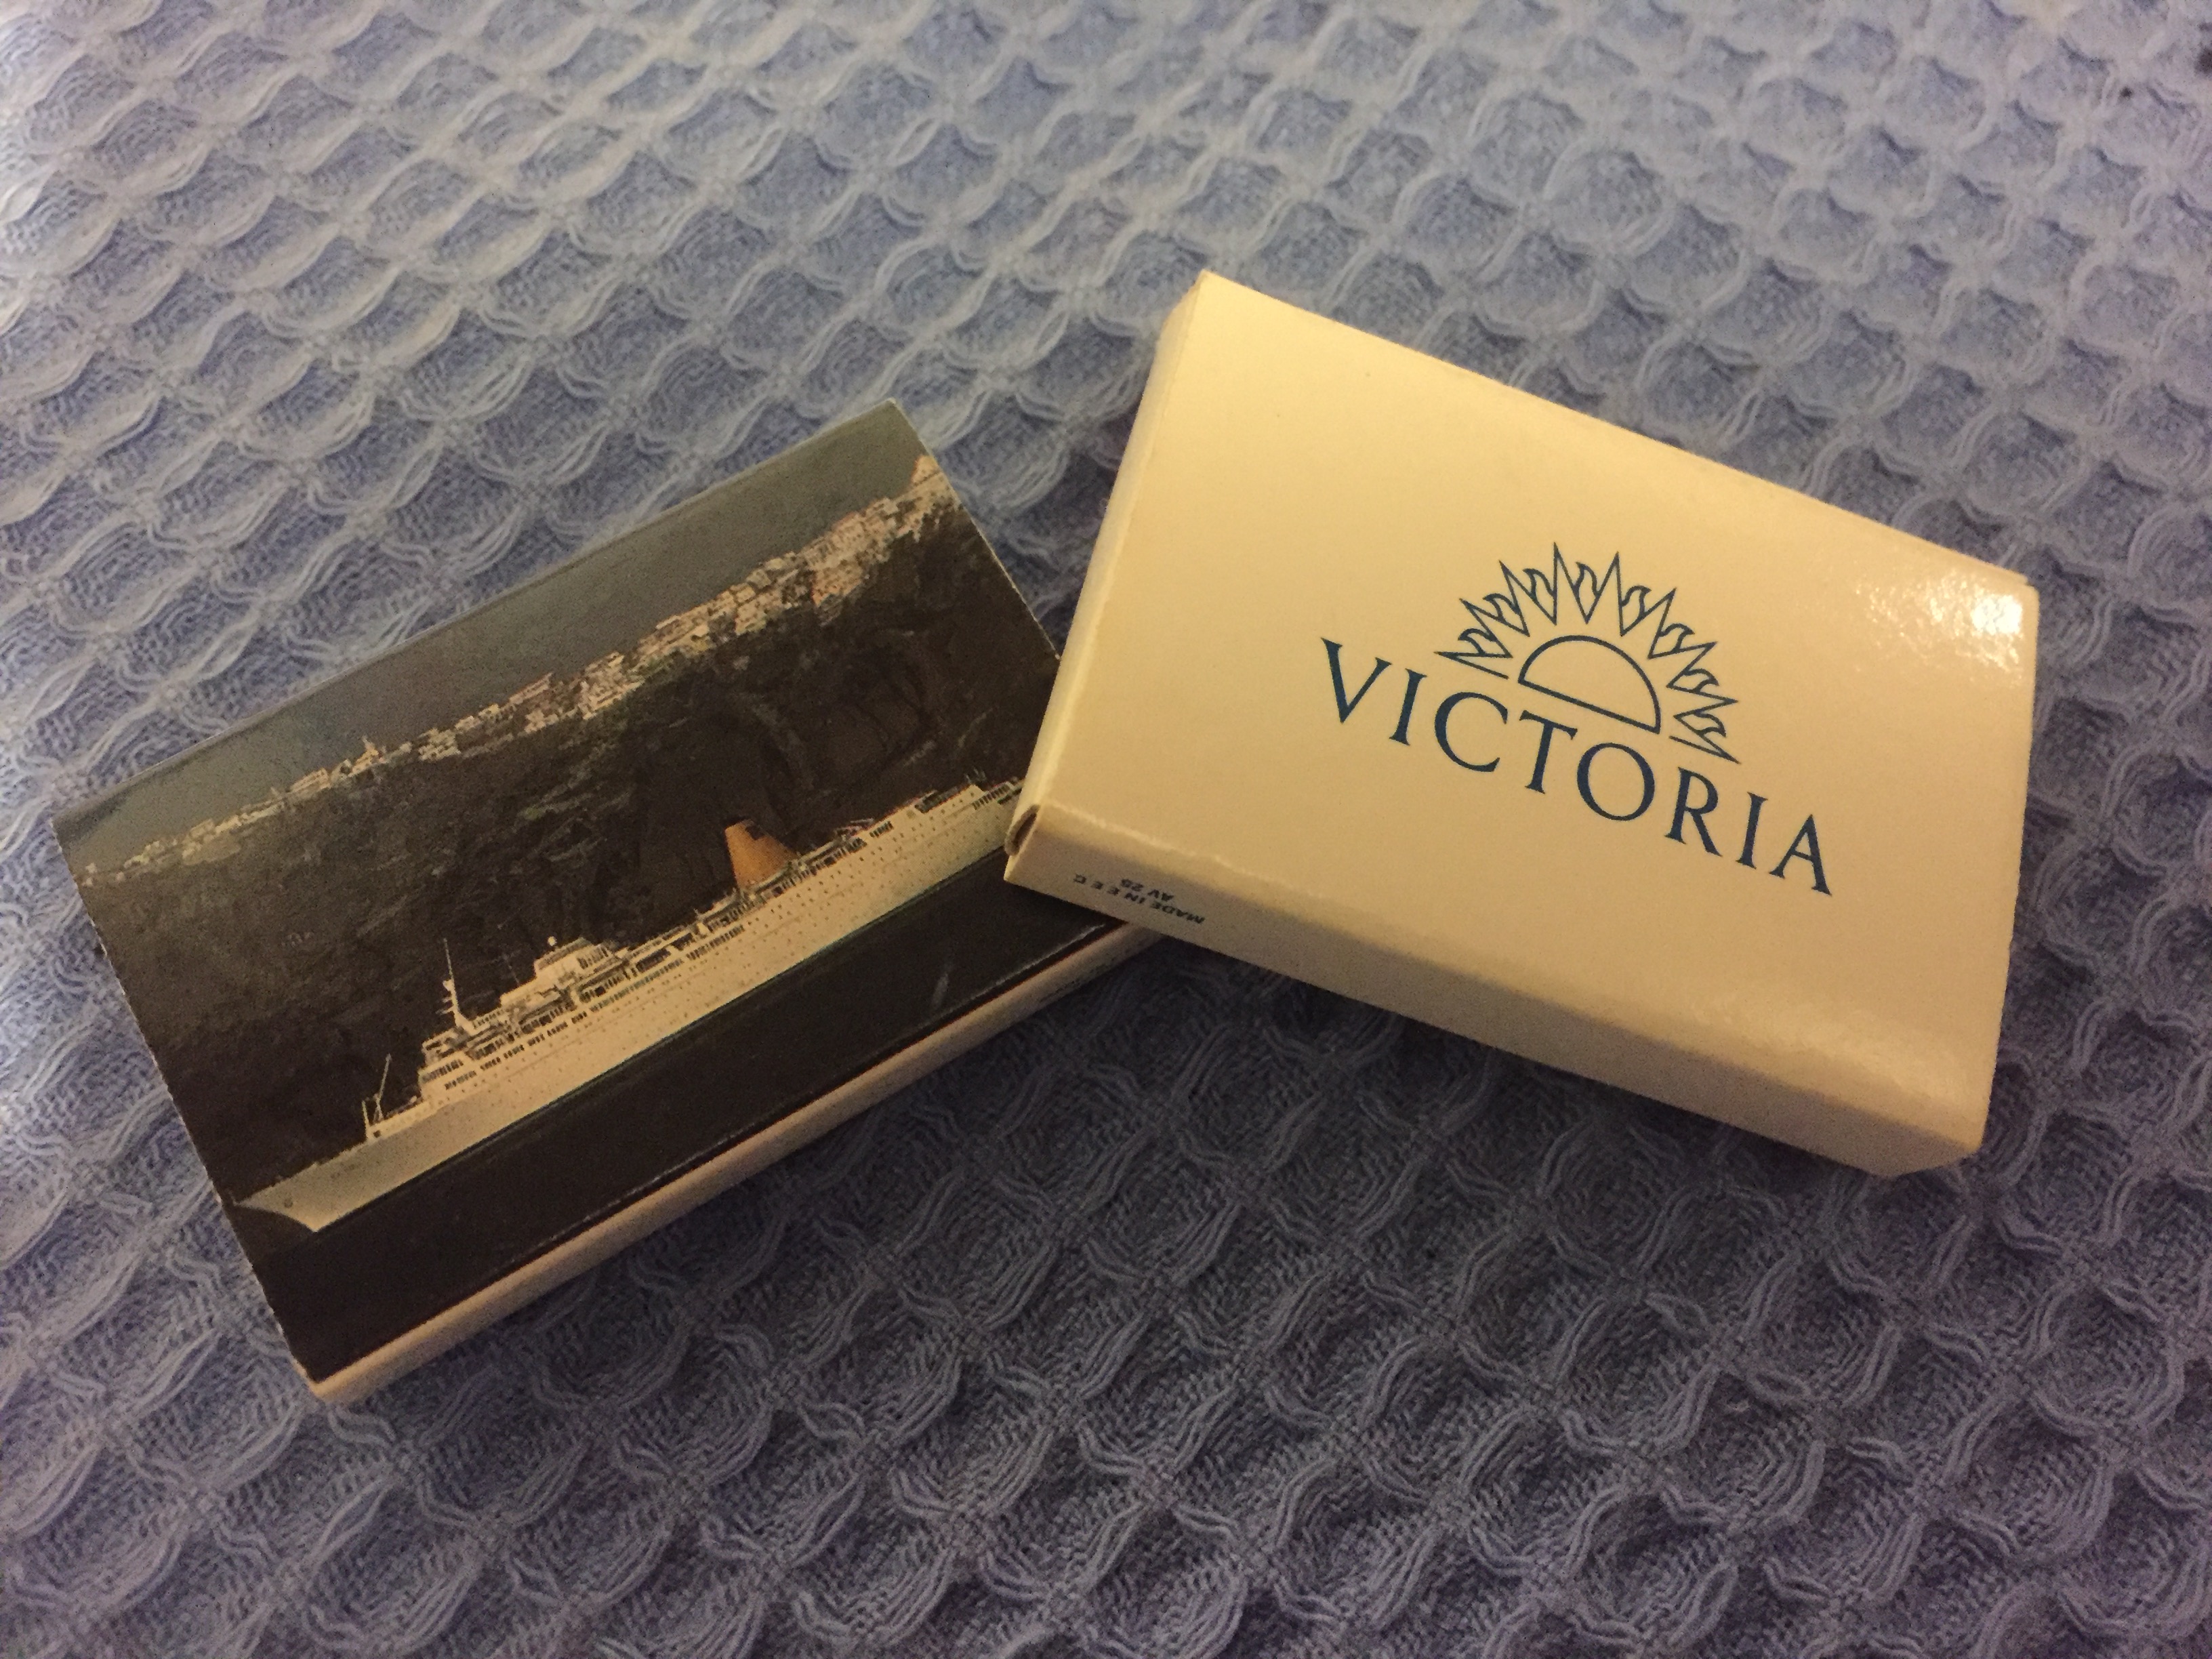 TWO BOXES OF UNUSED MATCHES FROM THE P&O LINE VESSEL VICTORIA